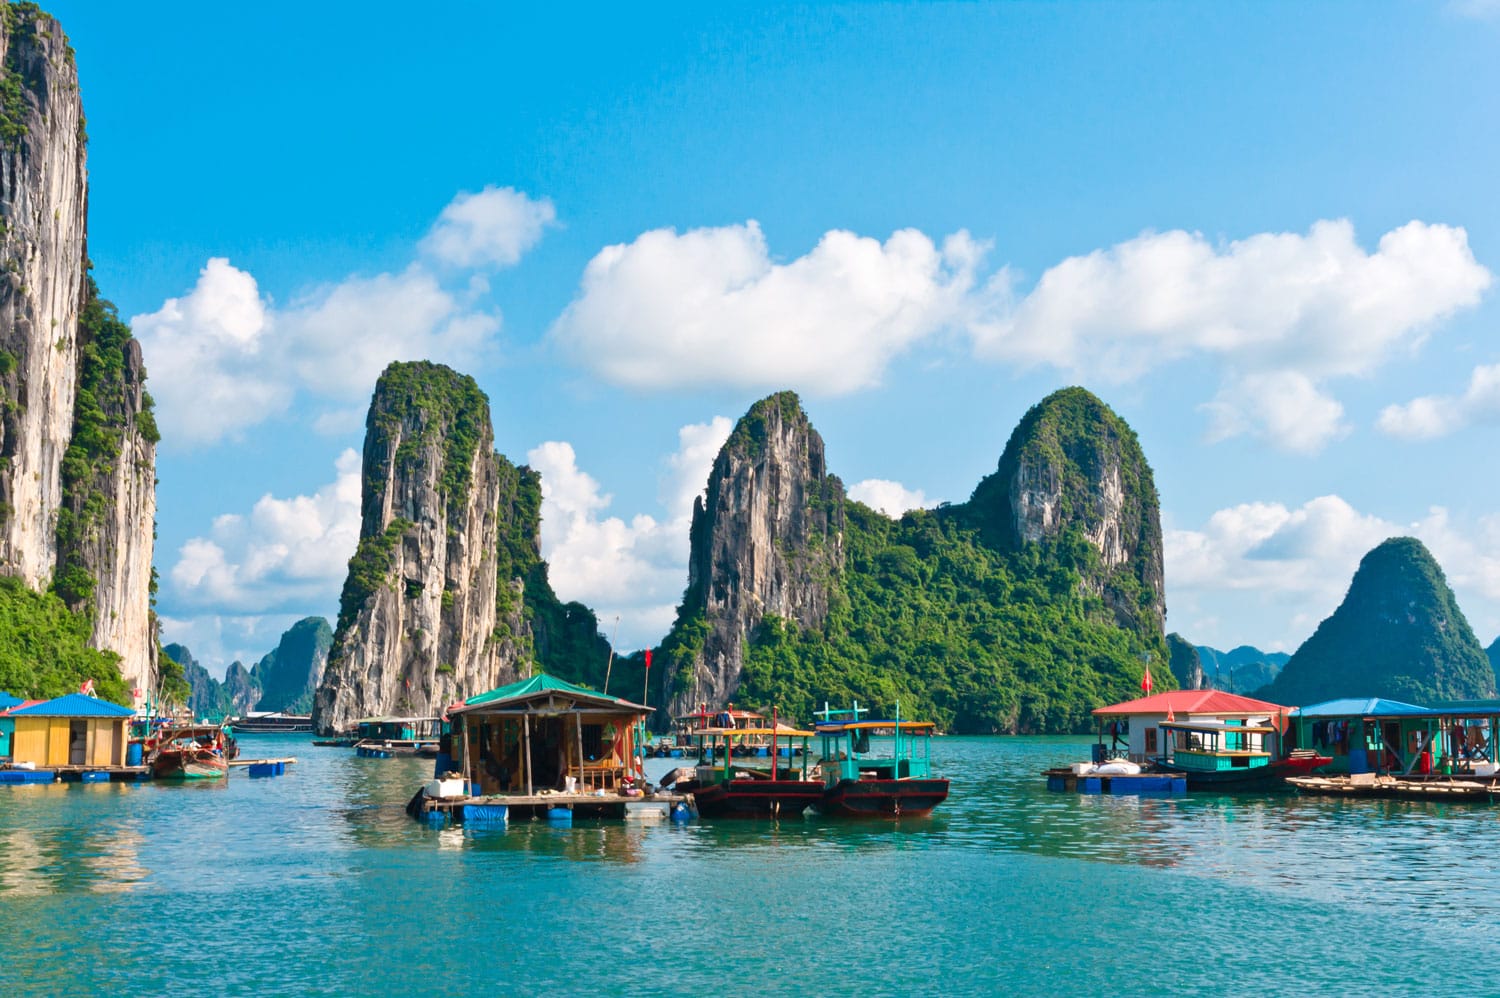 Floating village and rock islands in Halong Bay, Vietnam, Southeast Asia